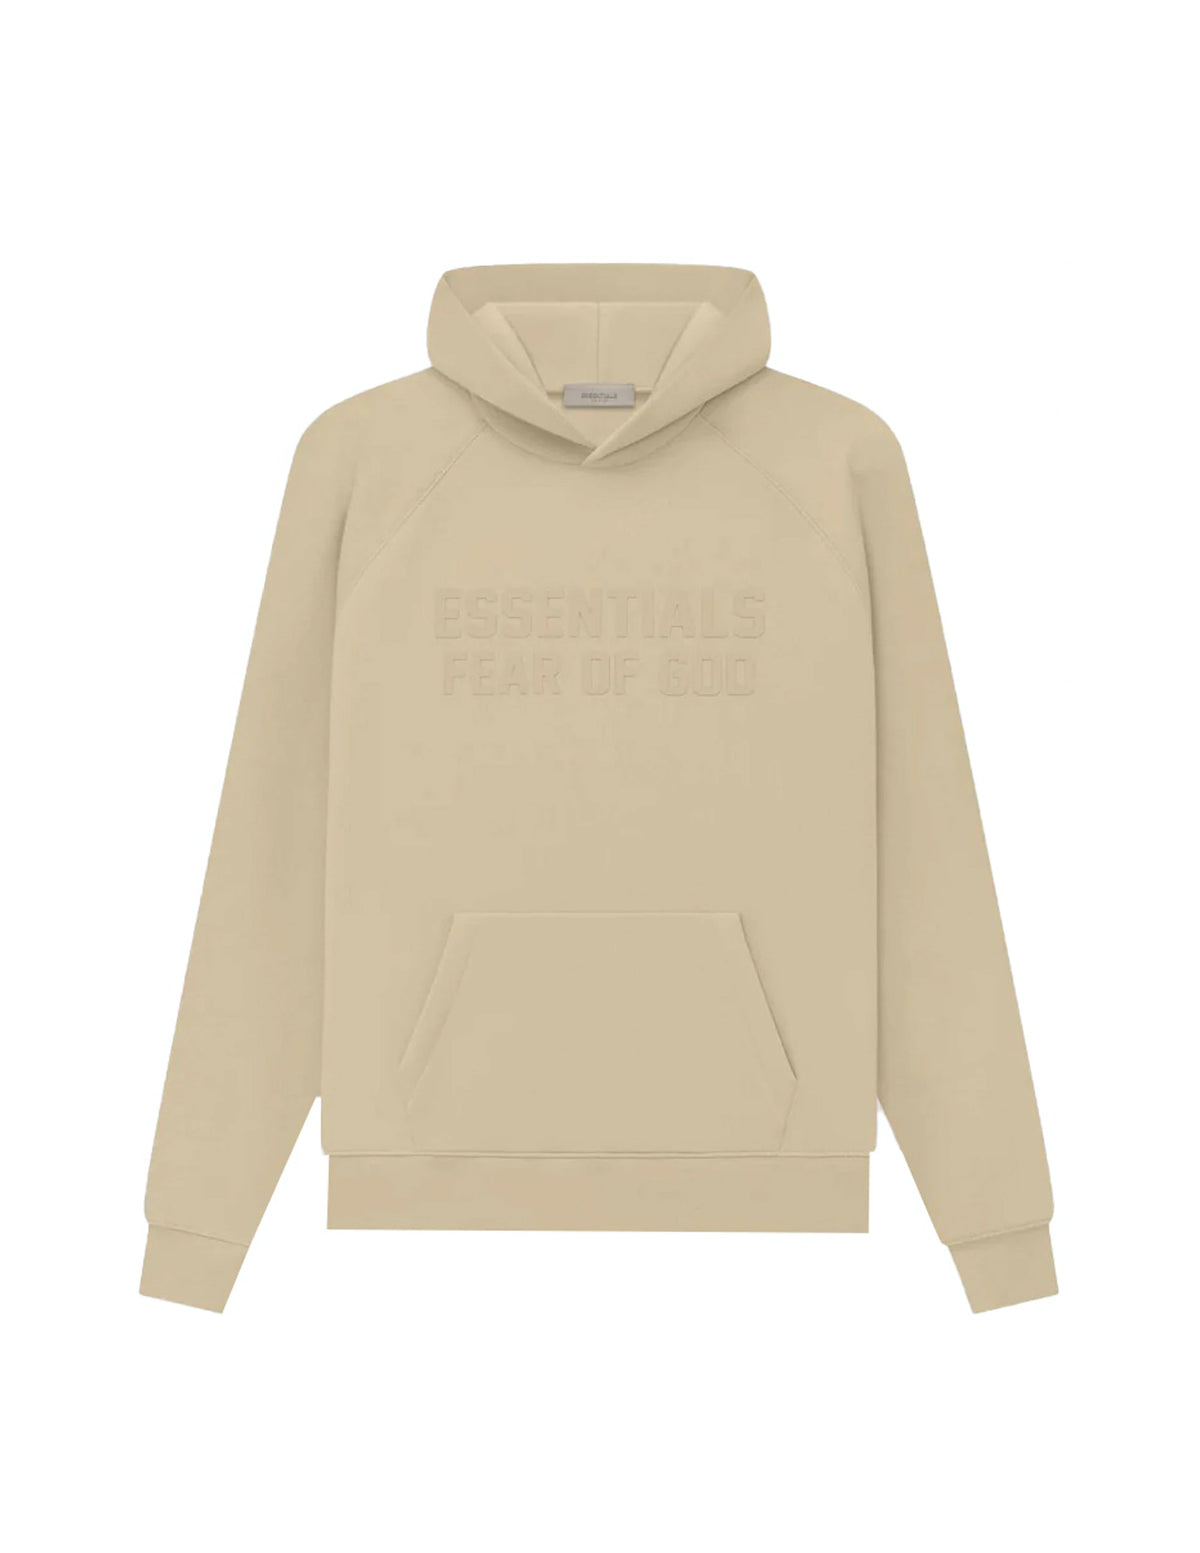 Fear of God Essentials Hoodie "Sand"